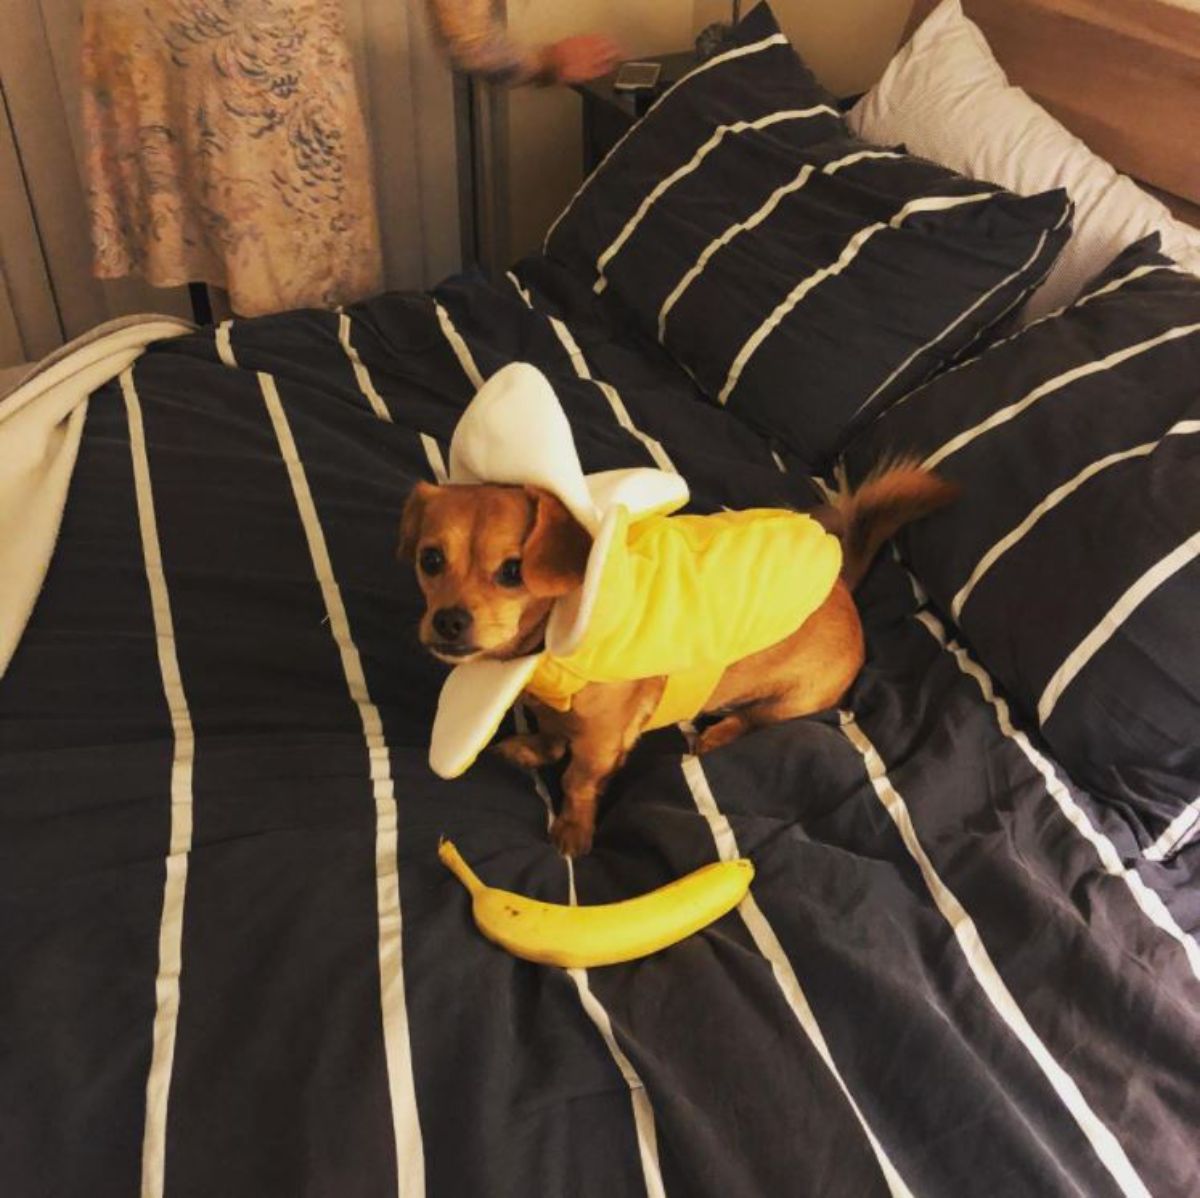 pekehund dog in its banana costume on the bed